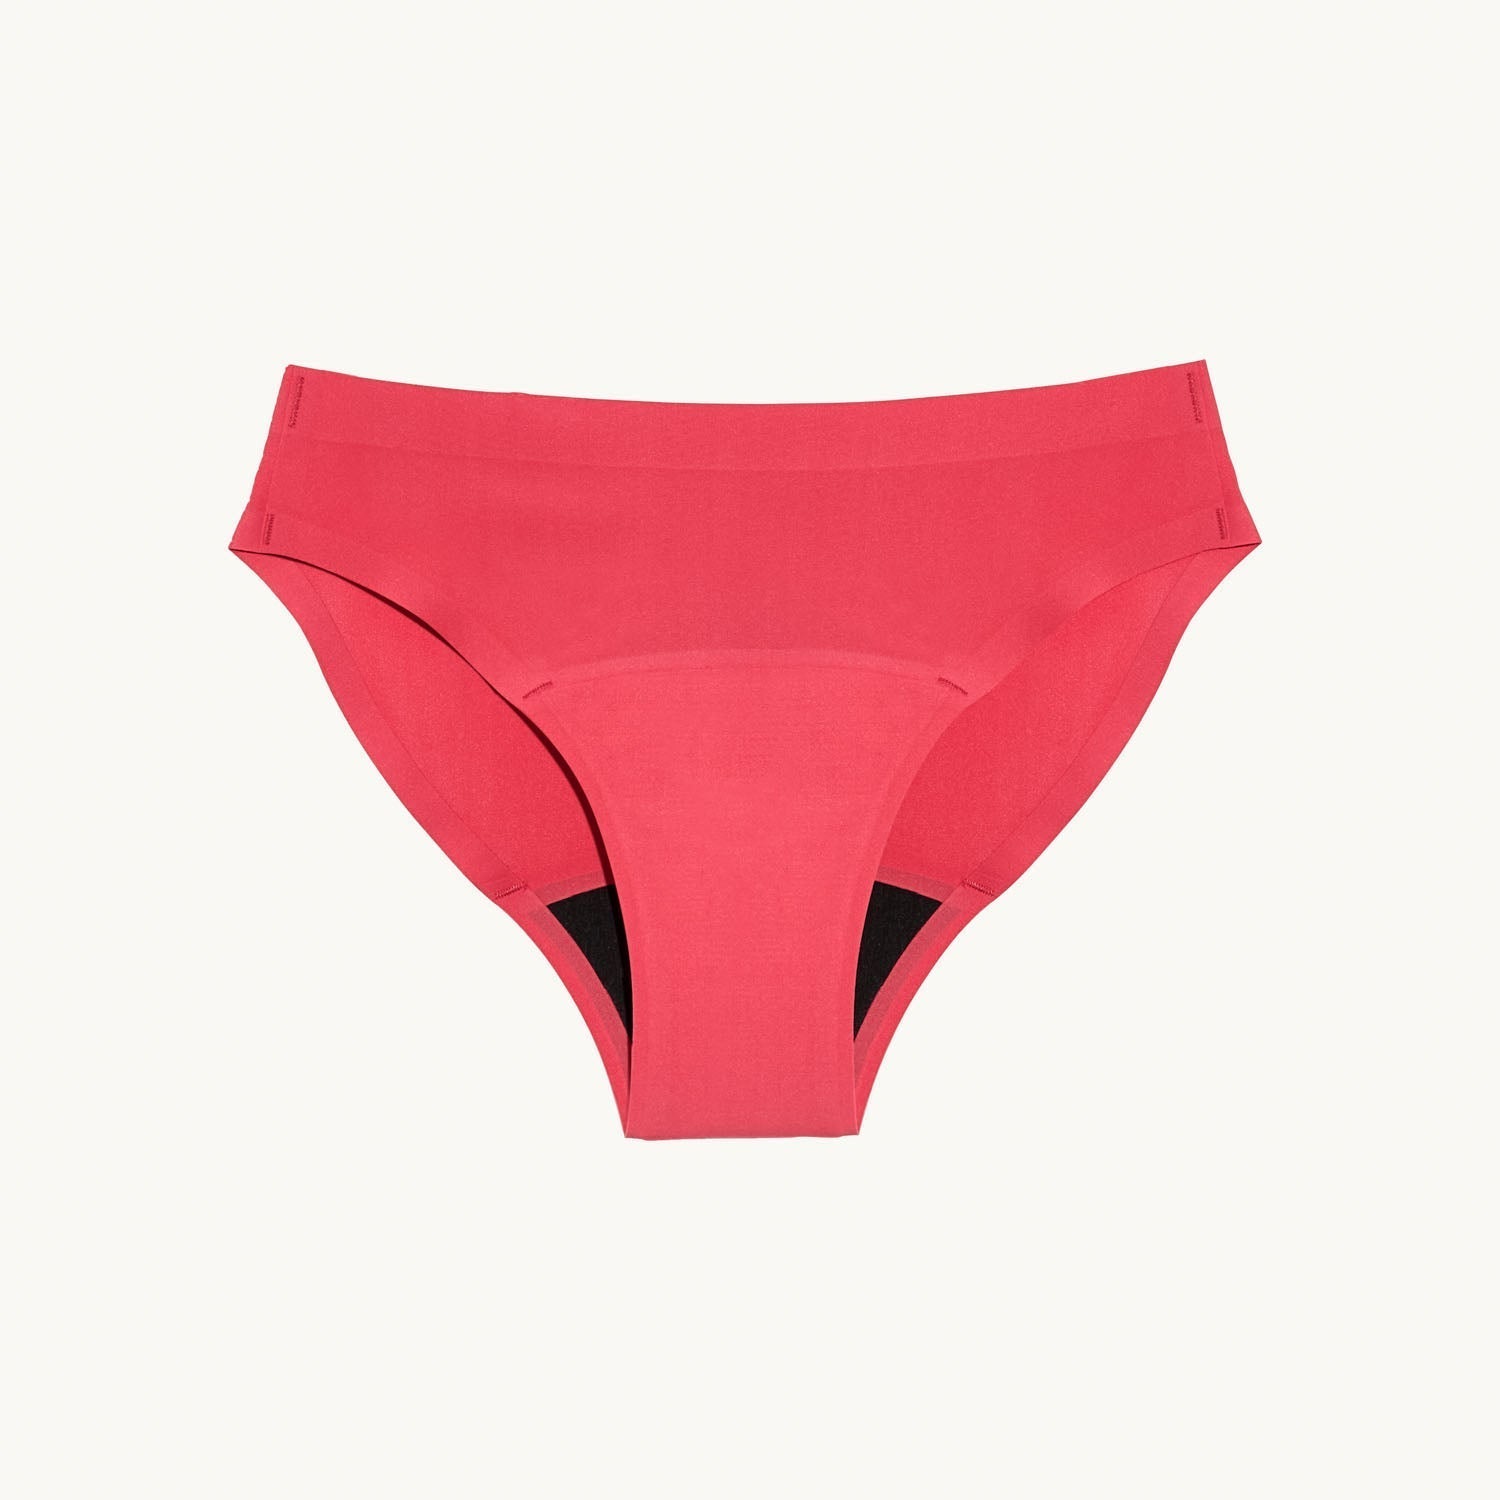 NWT KT by KNIX Leakproof Period-Proof High Rise Bikini Fruit Punch Red Size  M/16